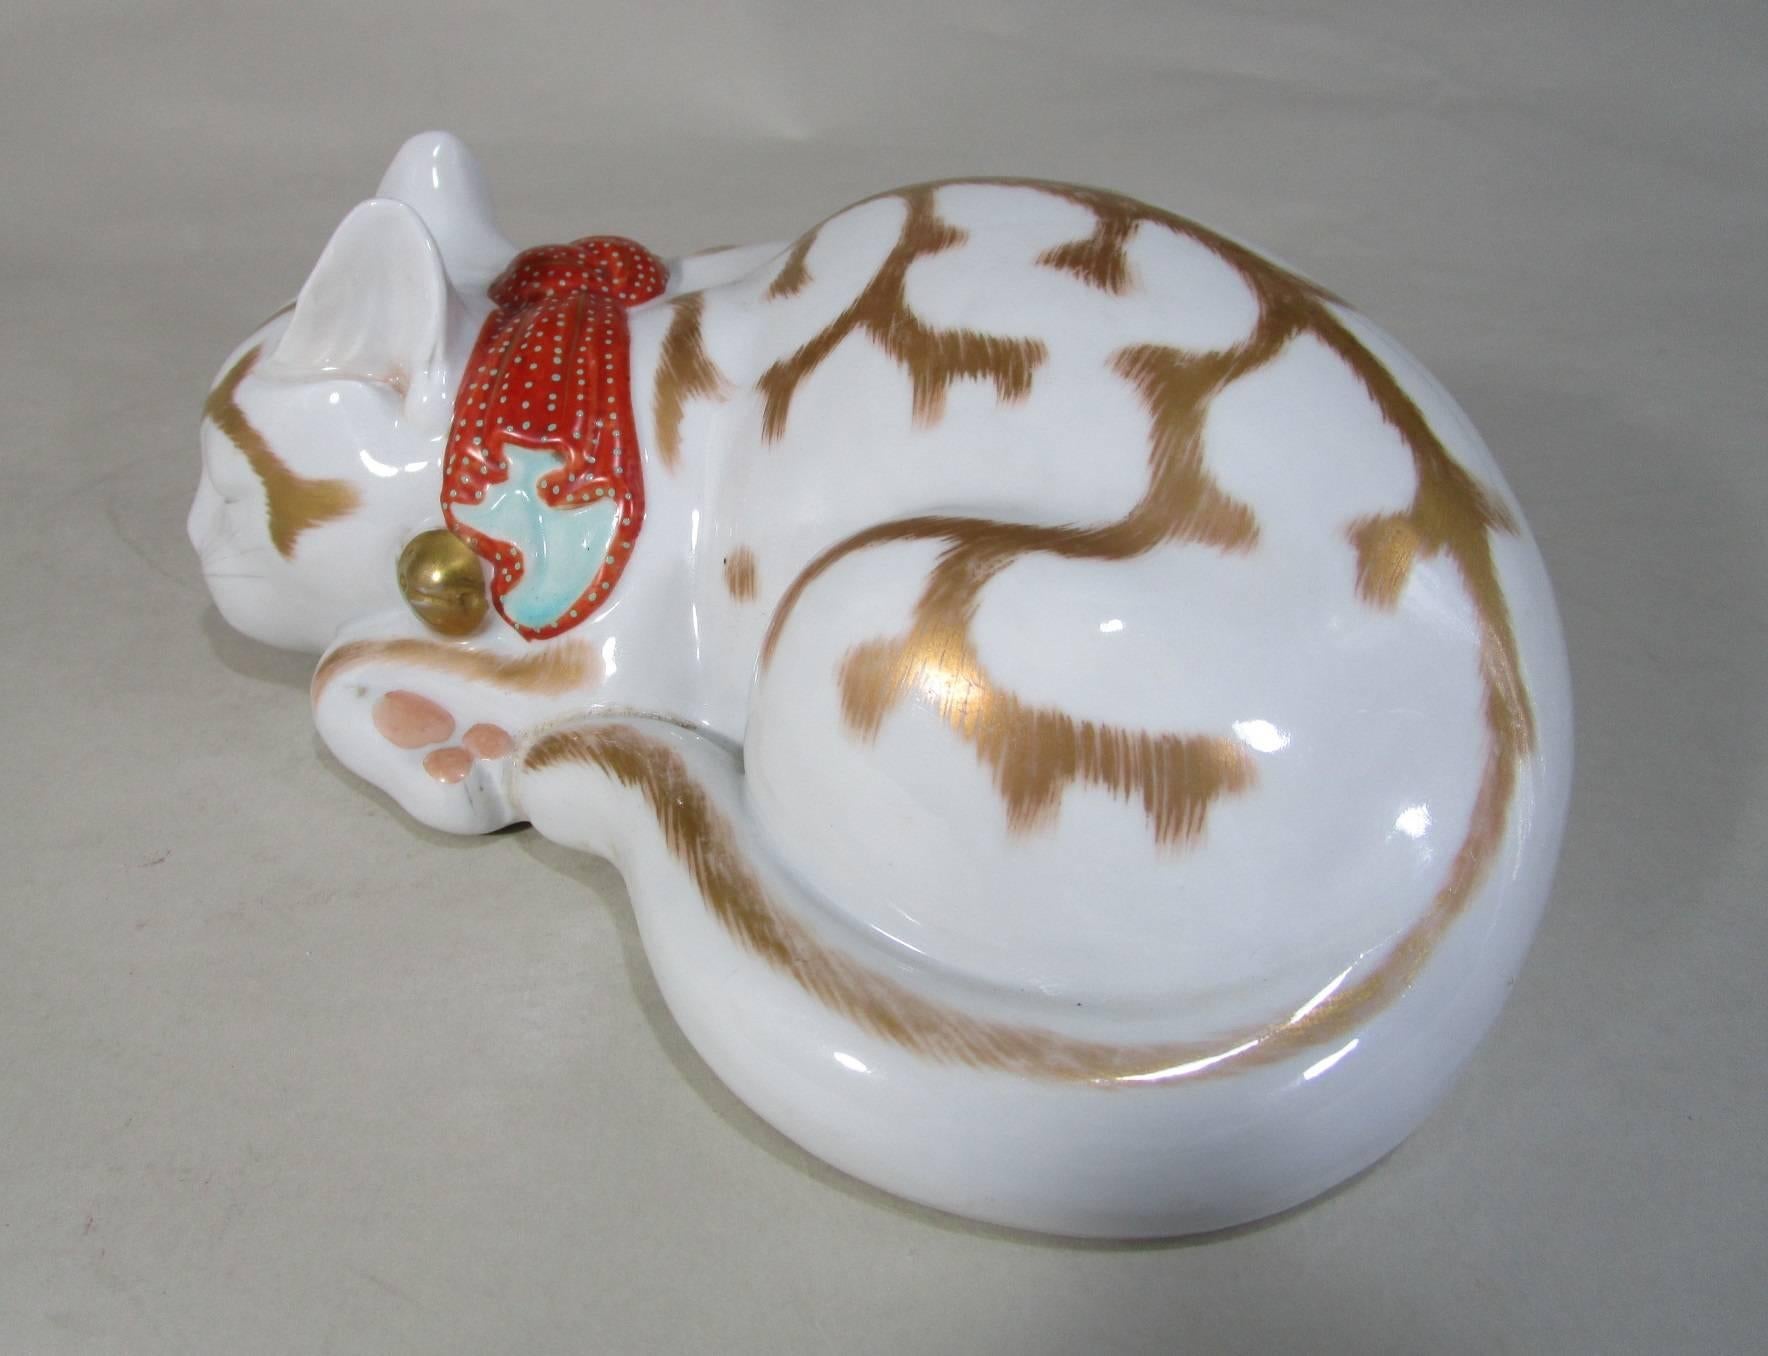 Exquisite antique Japanese Kutani sculpture of a sleeping cat in fine porcelain from Meiji period, inspired by the small wooden sculpture at the entrance of Toshougu shrine in Nikko, Japan, by the acclaimed sculpture artist and architect Hidari